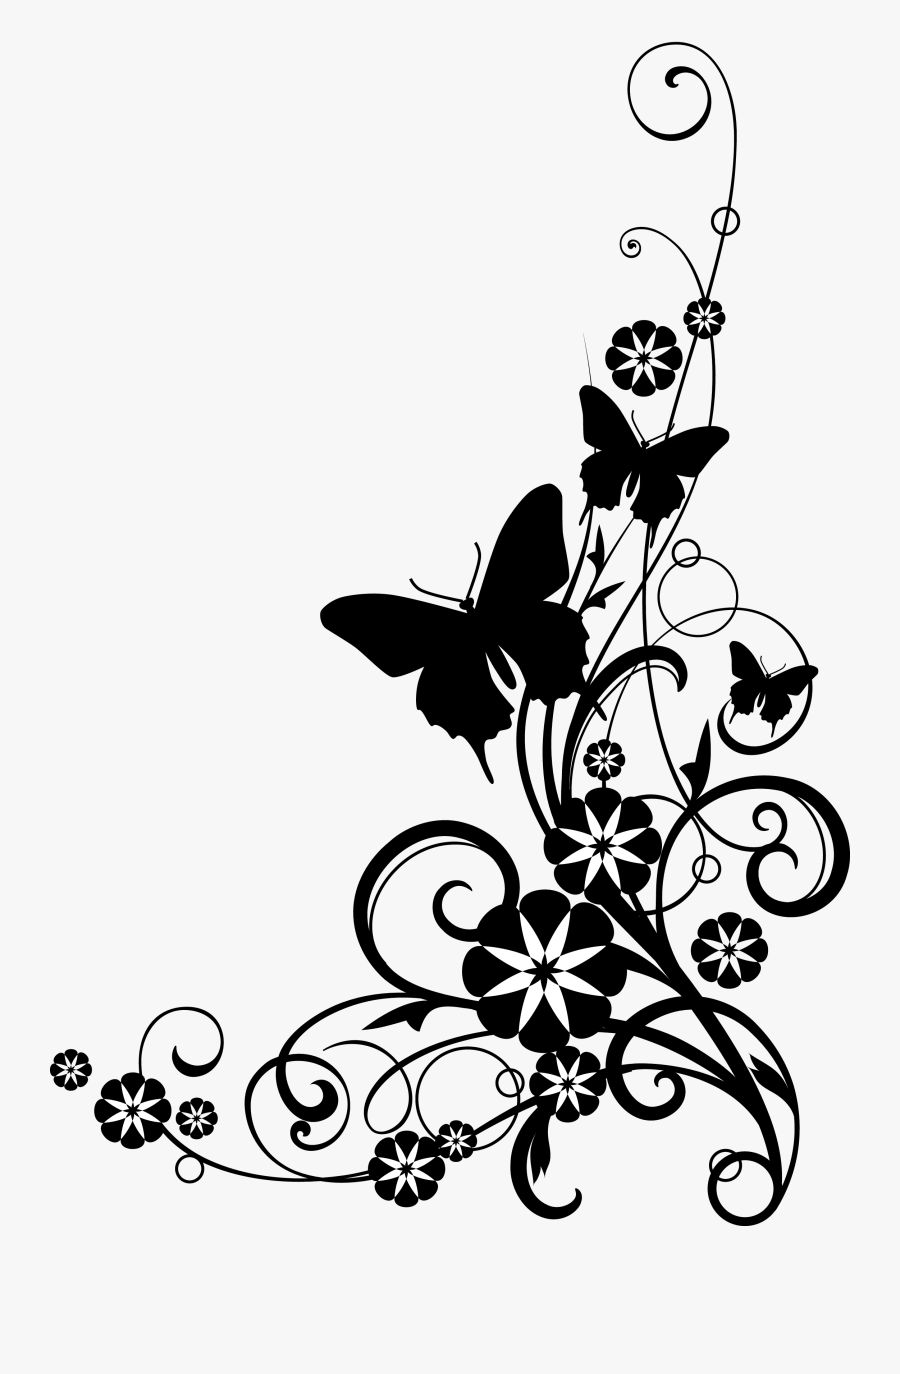 Butterfly Black And White Free Black And White Butterfly - Flowers Clip Art Black And White Border, Transparent Clipart